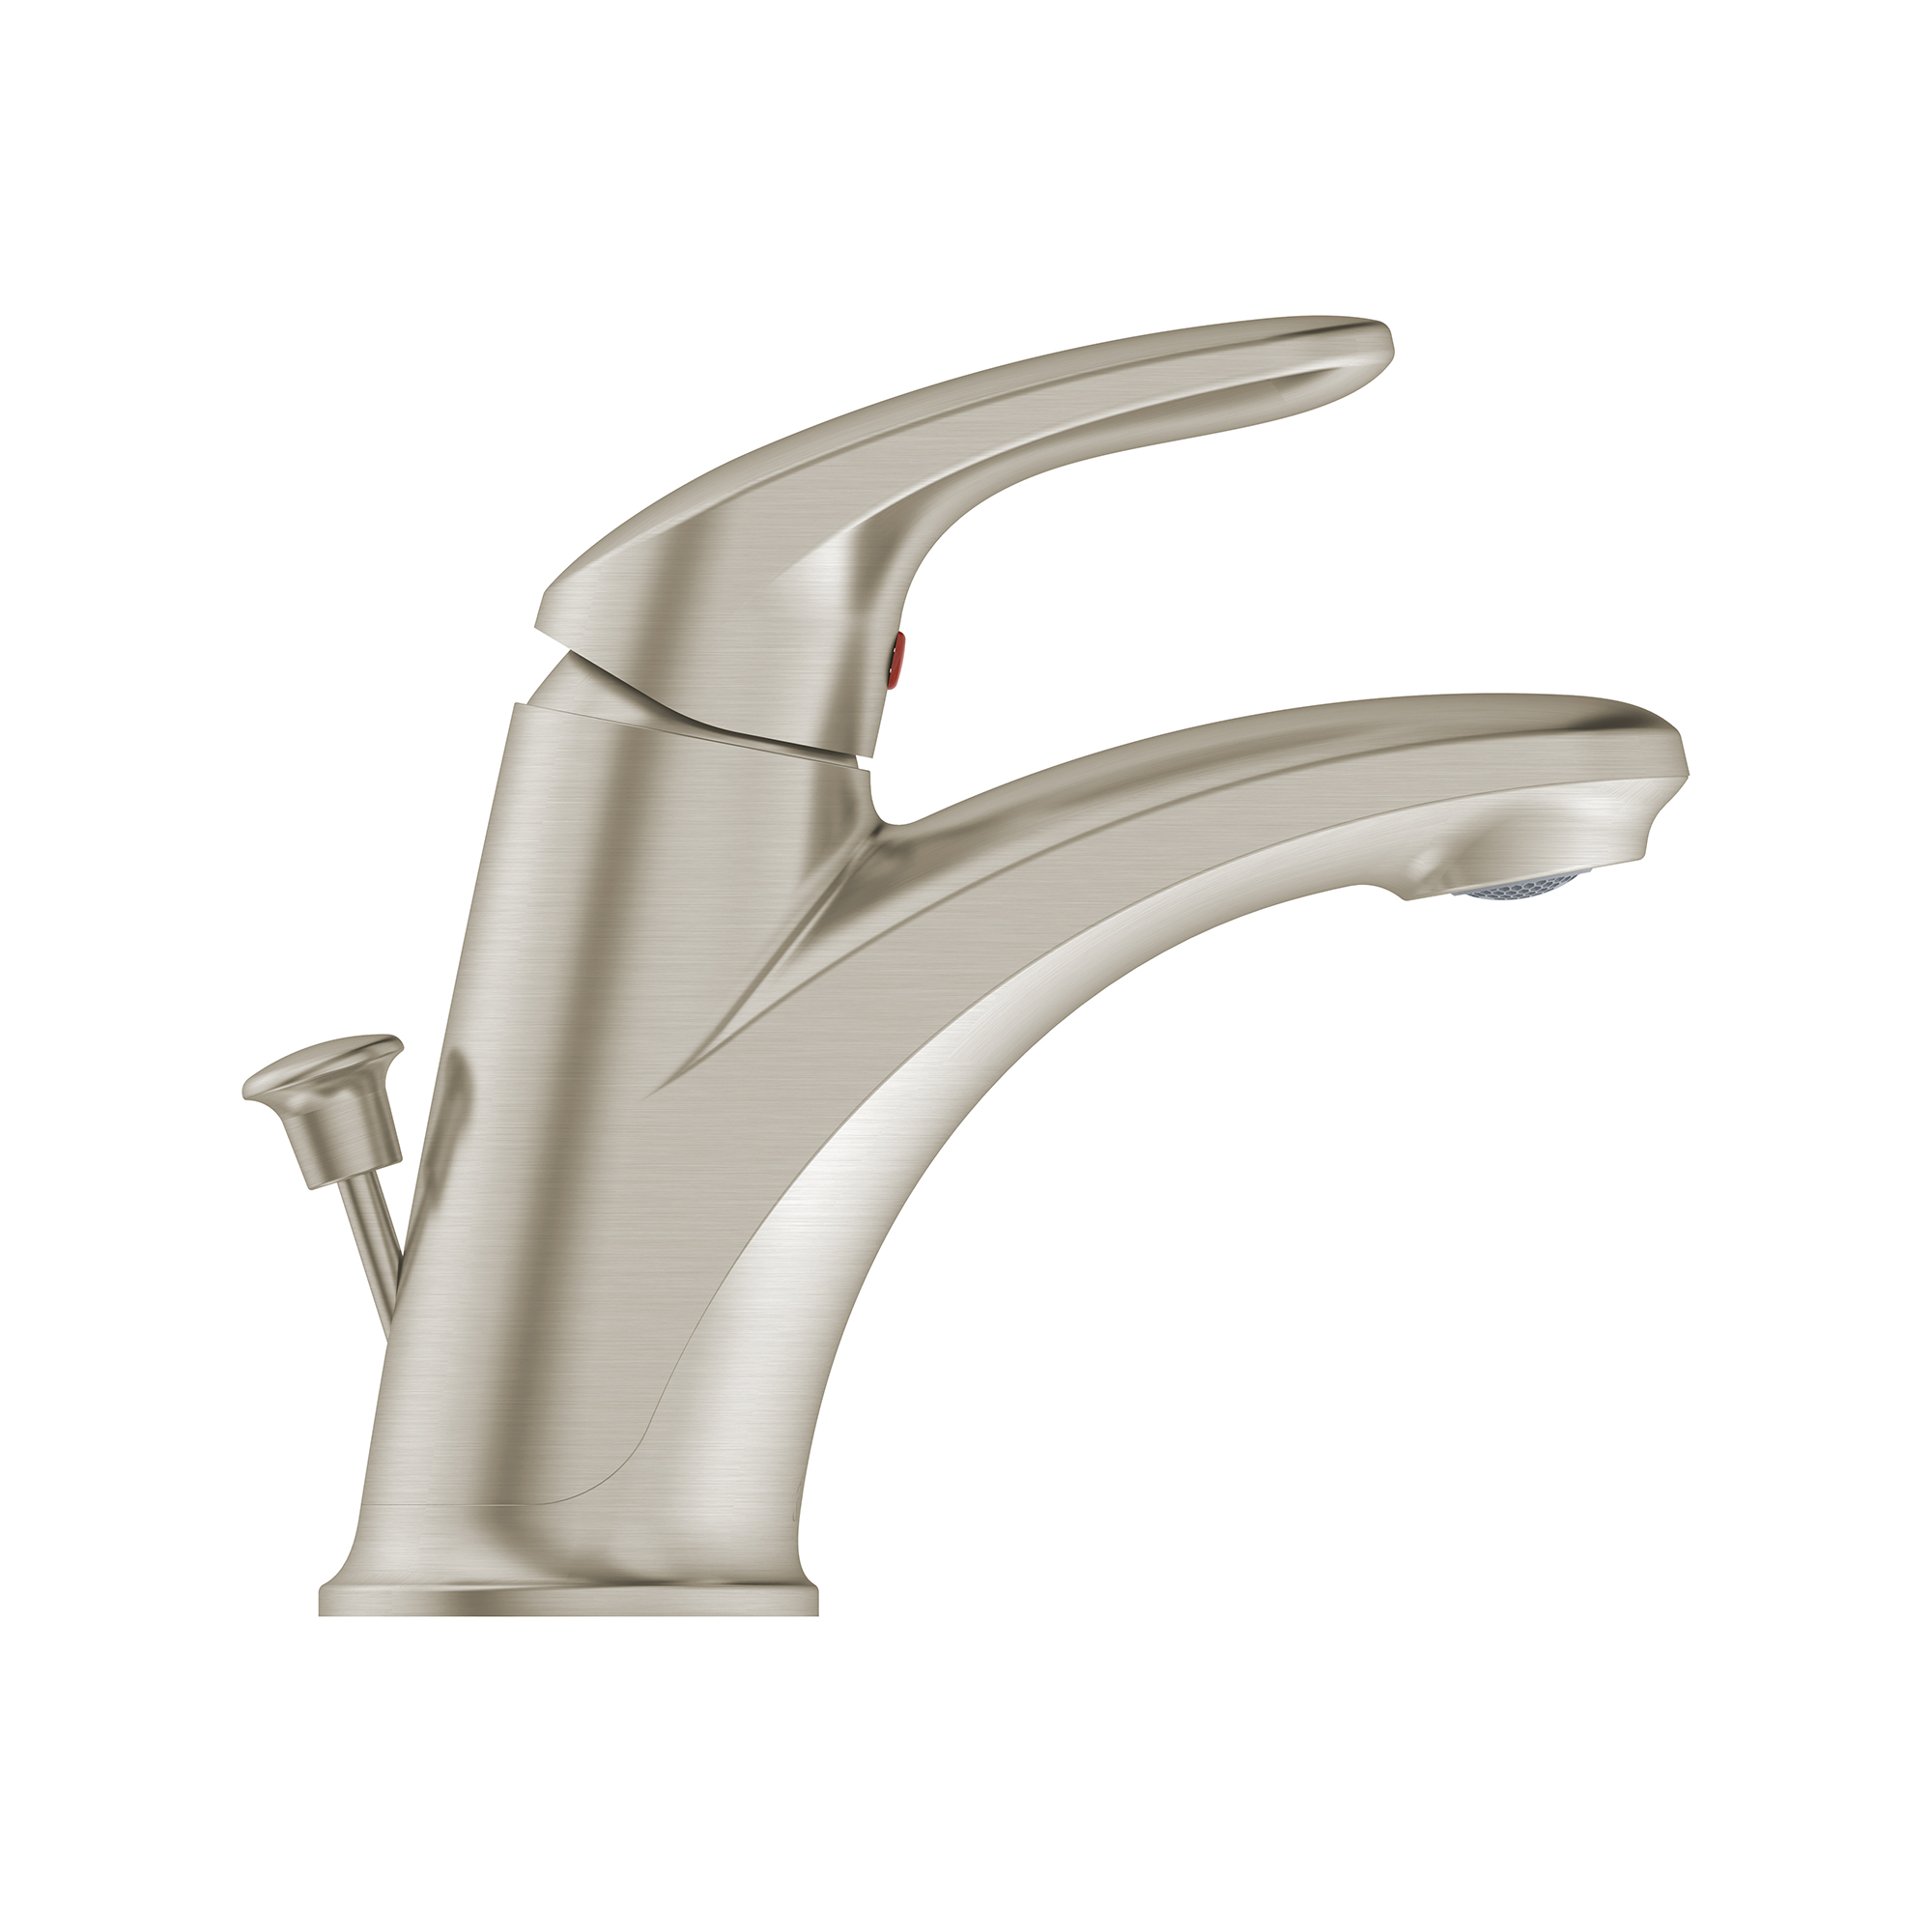 Colony® PRO Single Hole Single-Handle Bathroom Faucet 1.2 gpm/4.5 L/min With Lever Handle